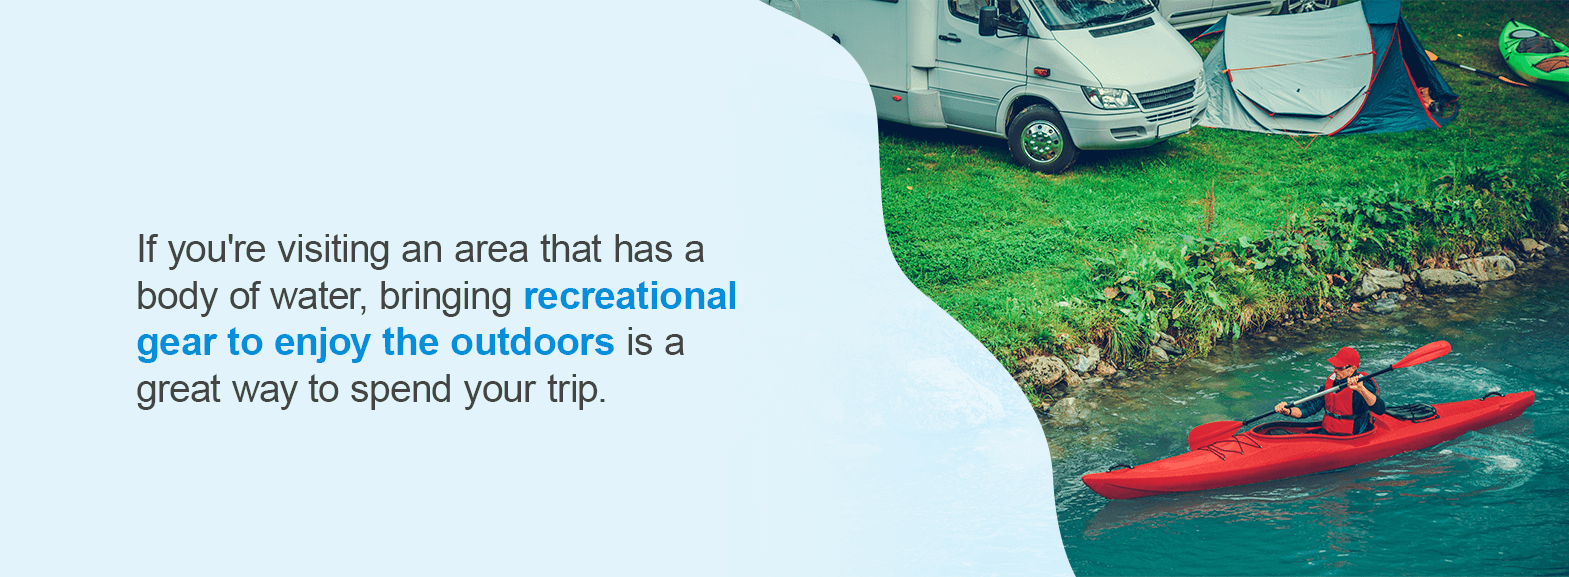 Recreational Equipment. If you're visiting an area that has a body of water or nice outdoor space to explore, bringing recreational gear to enjoy the outdoors is a great way to spend your trip. 